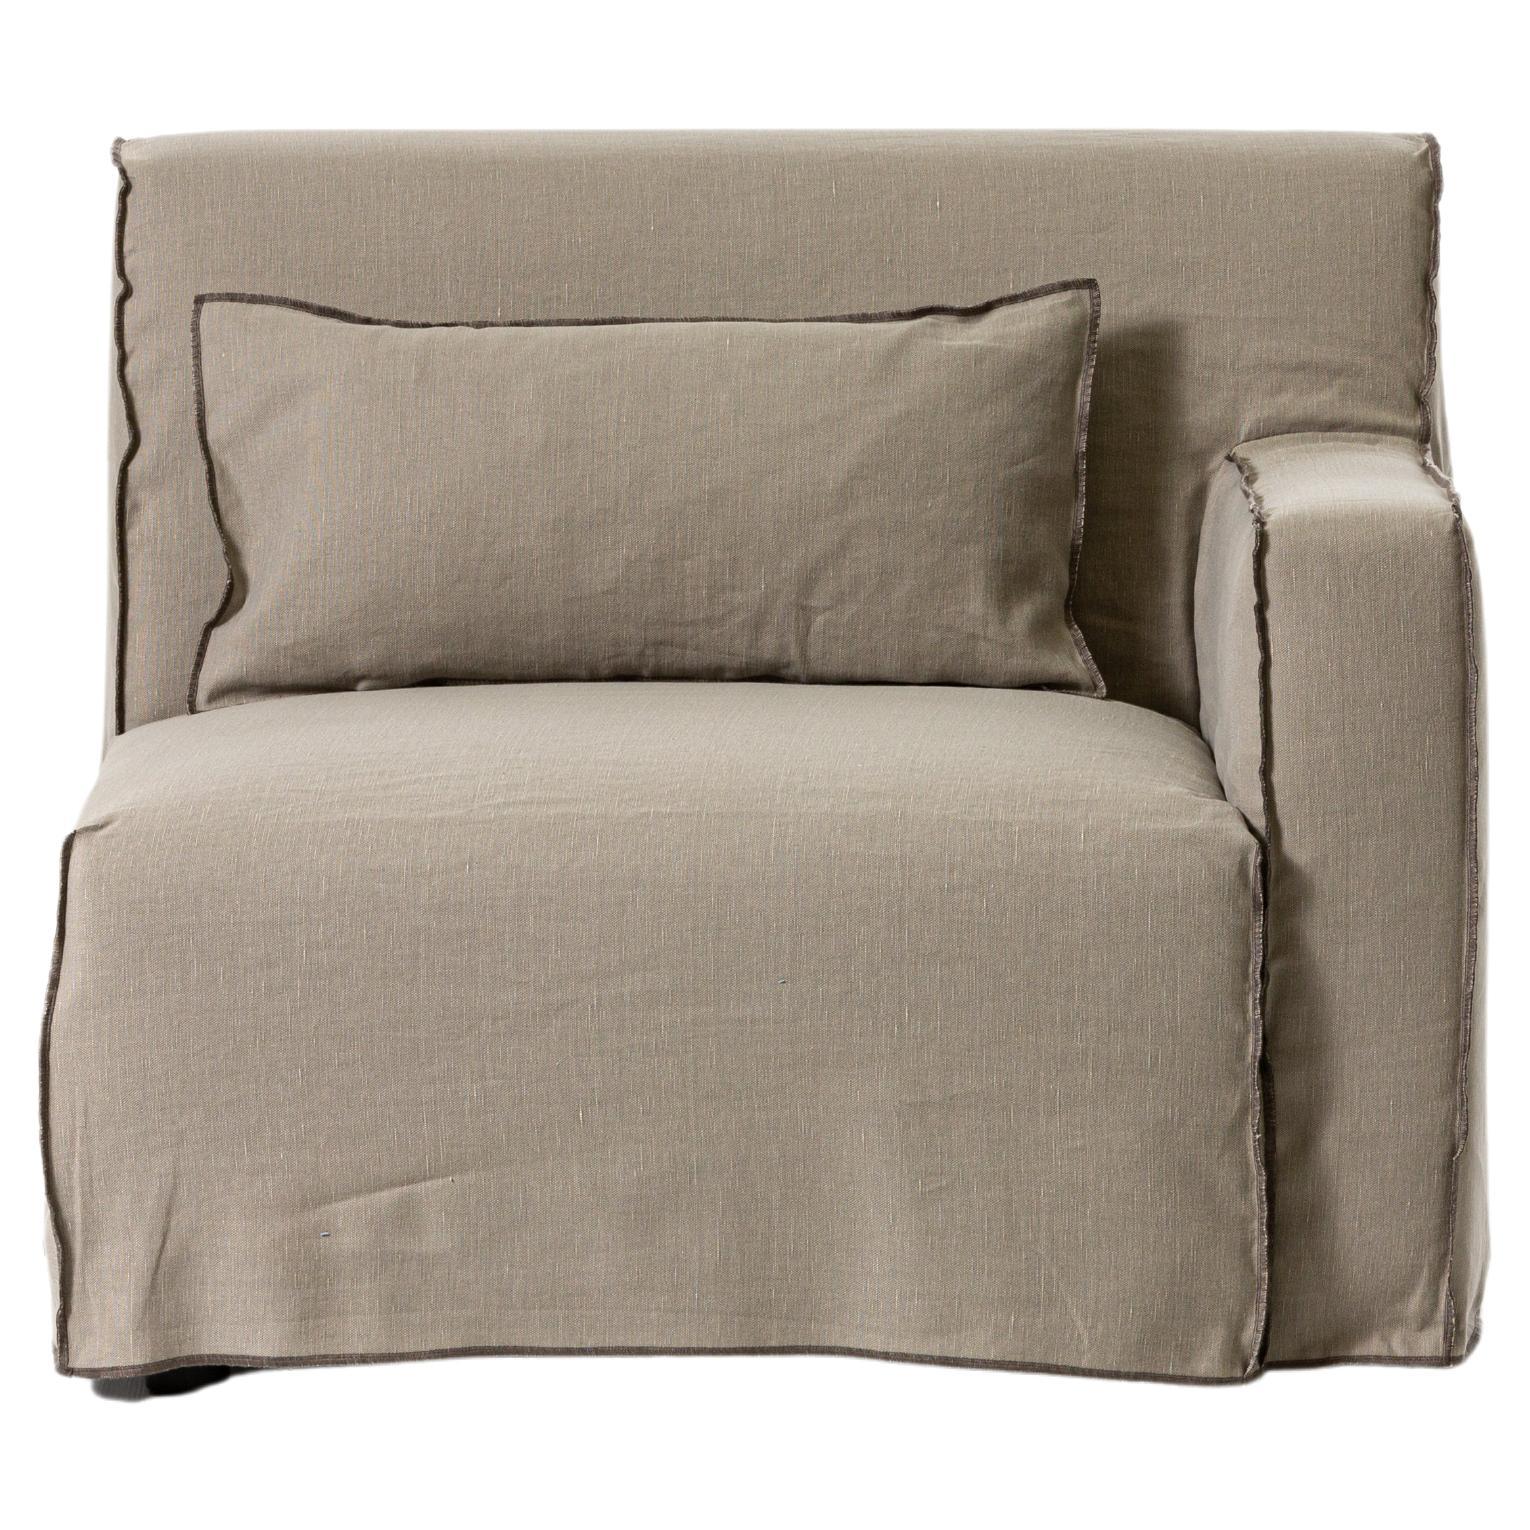 Gervasoni More 04 Right Armrest Modular Sofa in Gesso Upholstery, Paola  Navone For Sale at 1stDibs